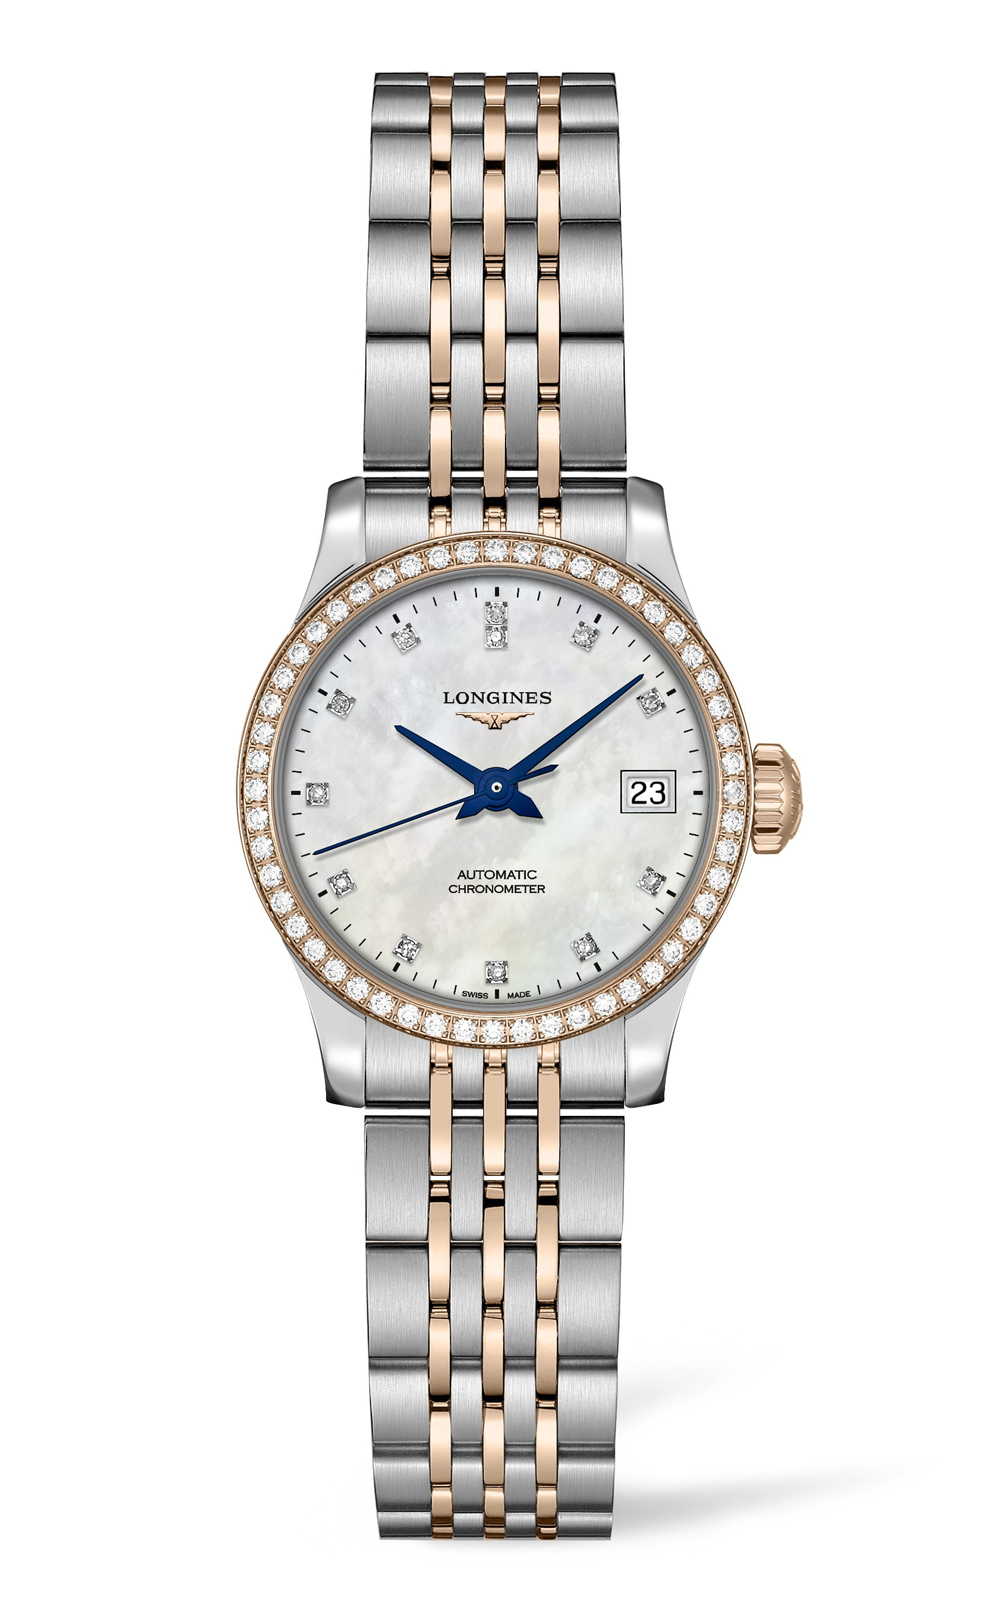 Đồng hồ nữ Longines Record Two Tone L2.320.5.89.7